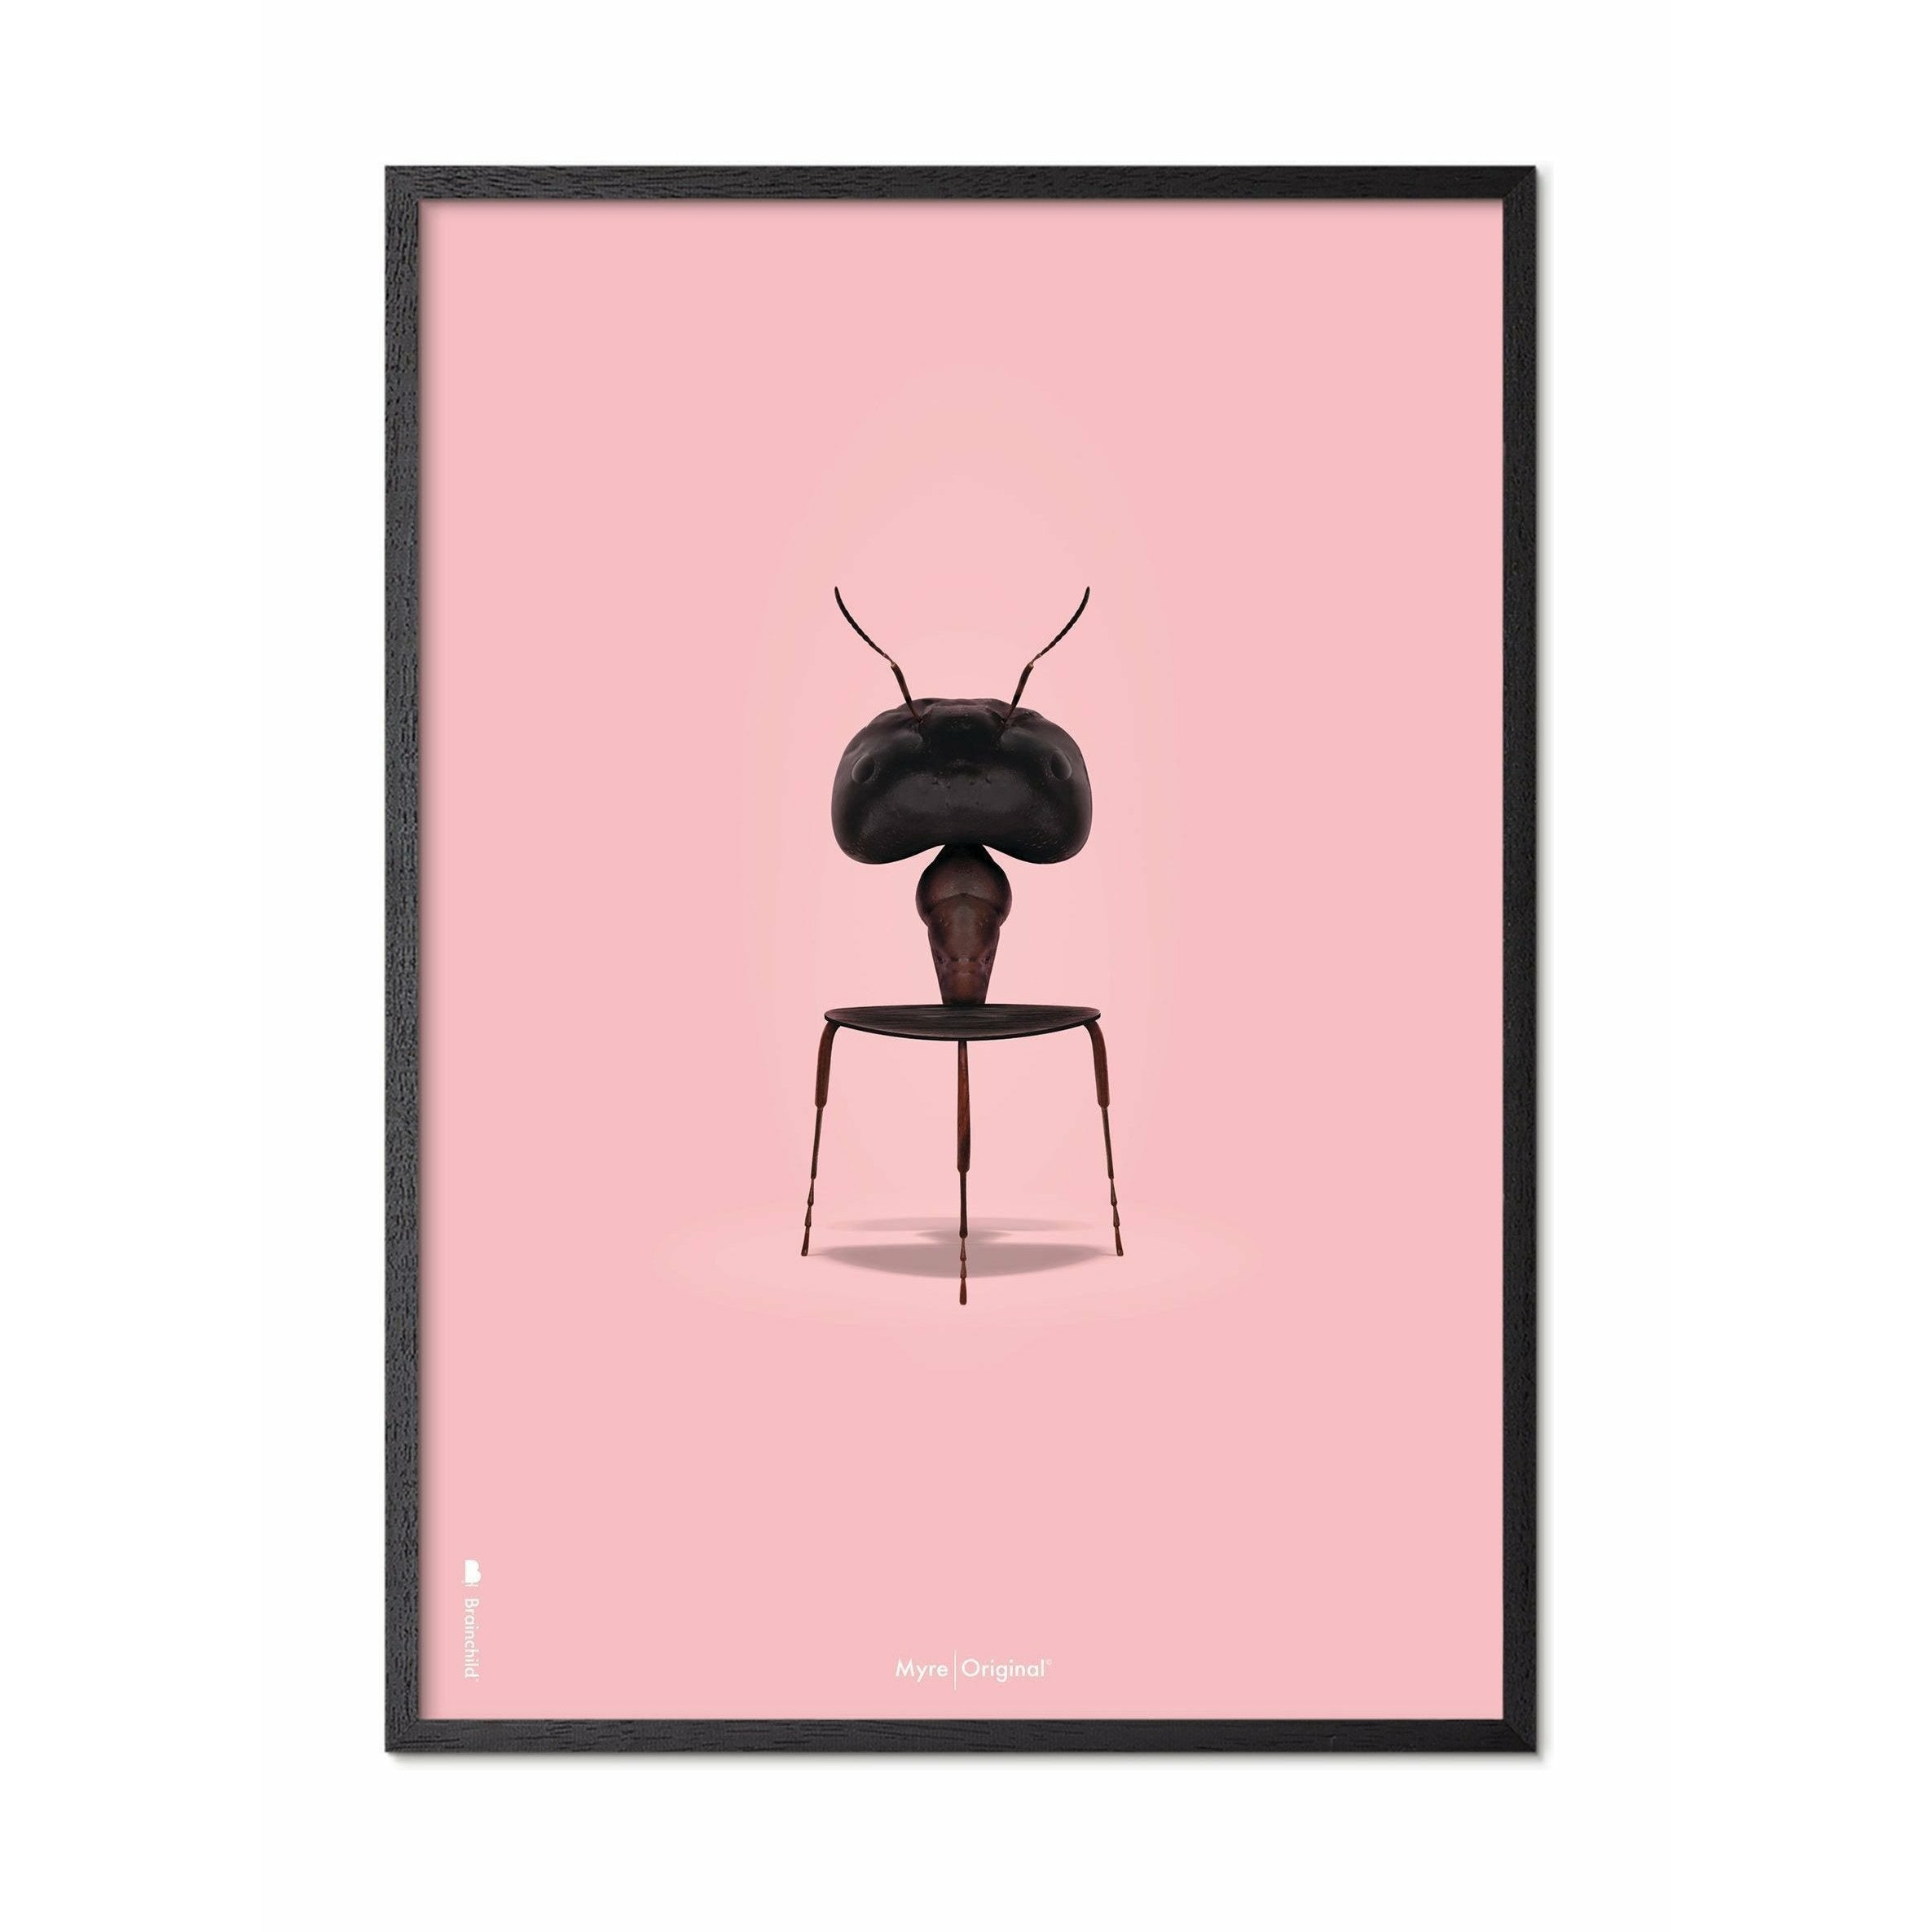 Brainchild Ant Classic Poster, Frame In Black Lacquered Wood 50x70 Cm, Pink Background